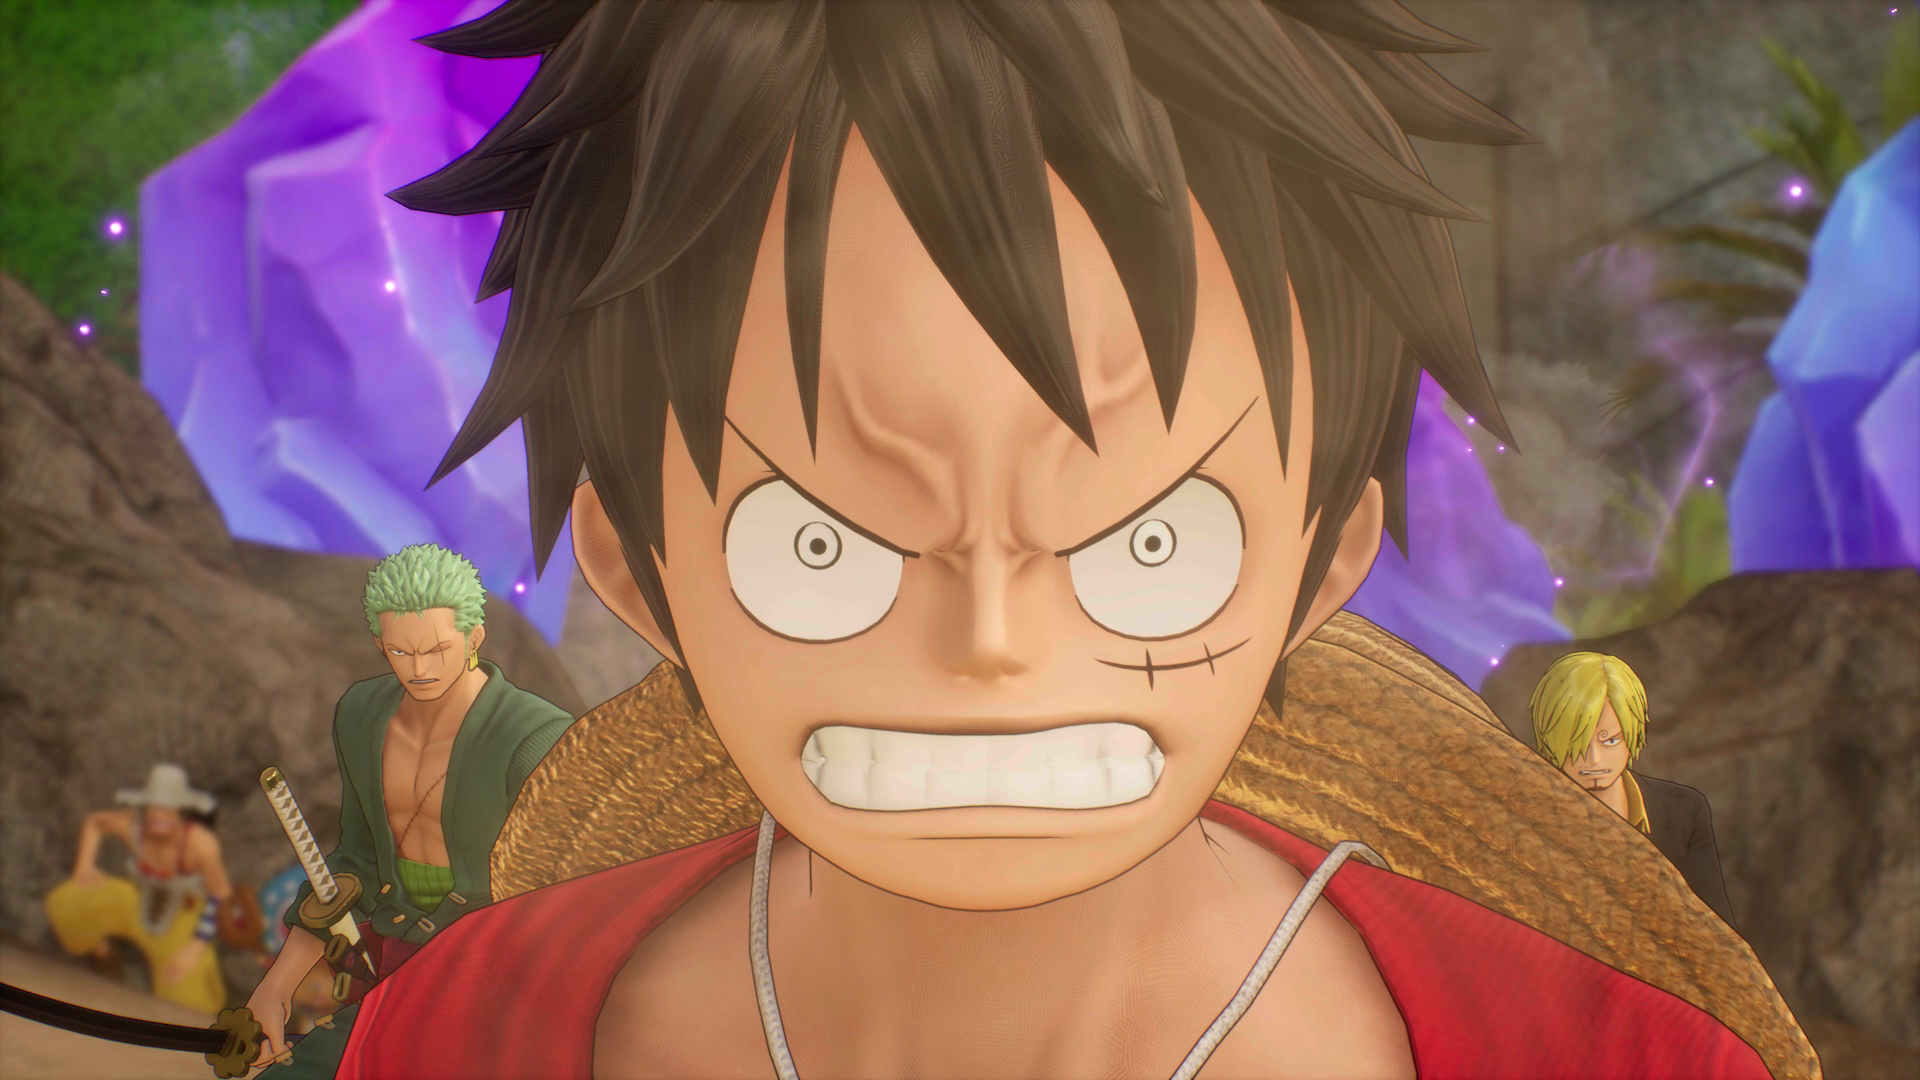 Journey to a land of adventure with ONE PIECE ODYSSEY – now available on  the PlayStation®4, PlayStation®5, and Xbox Series X